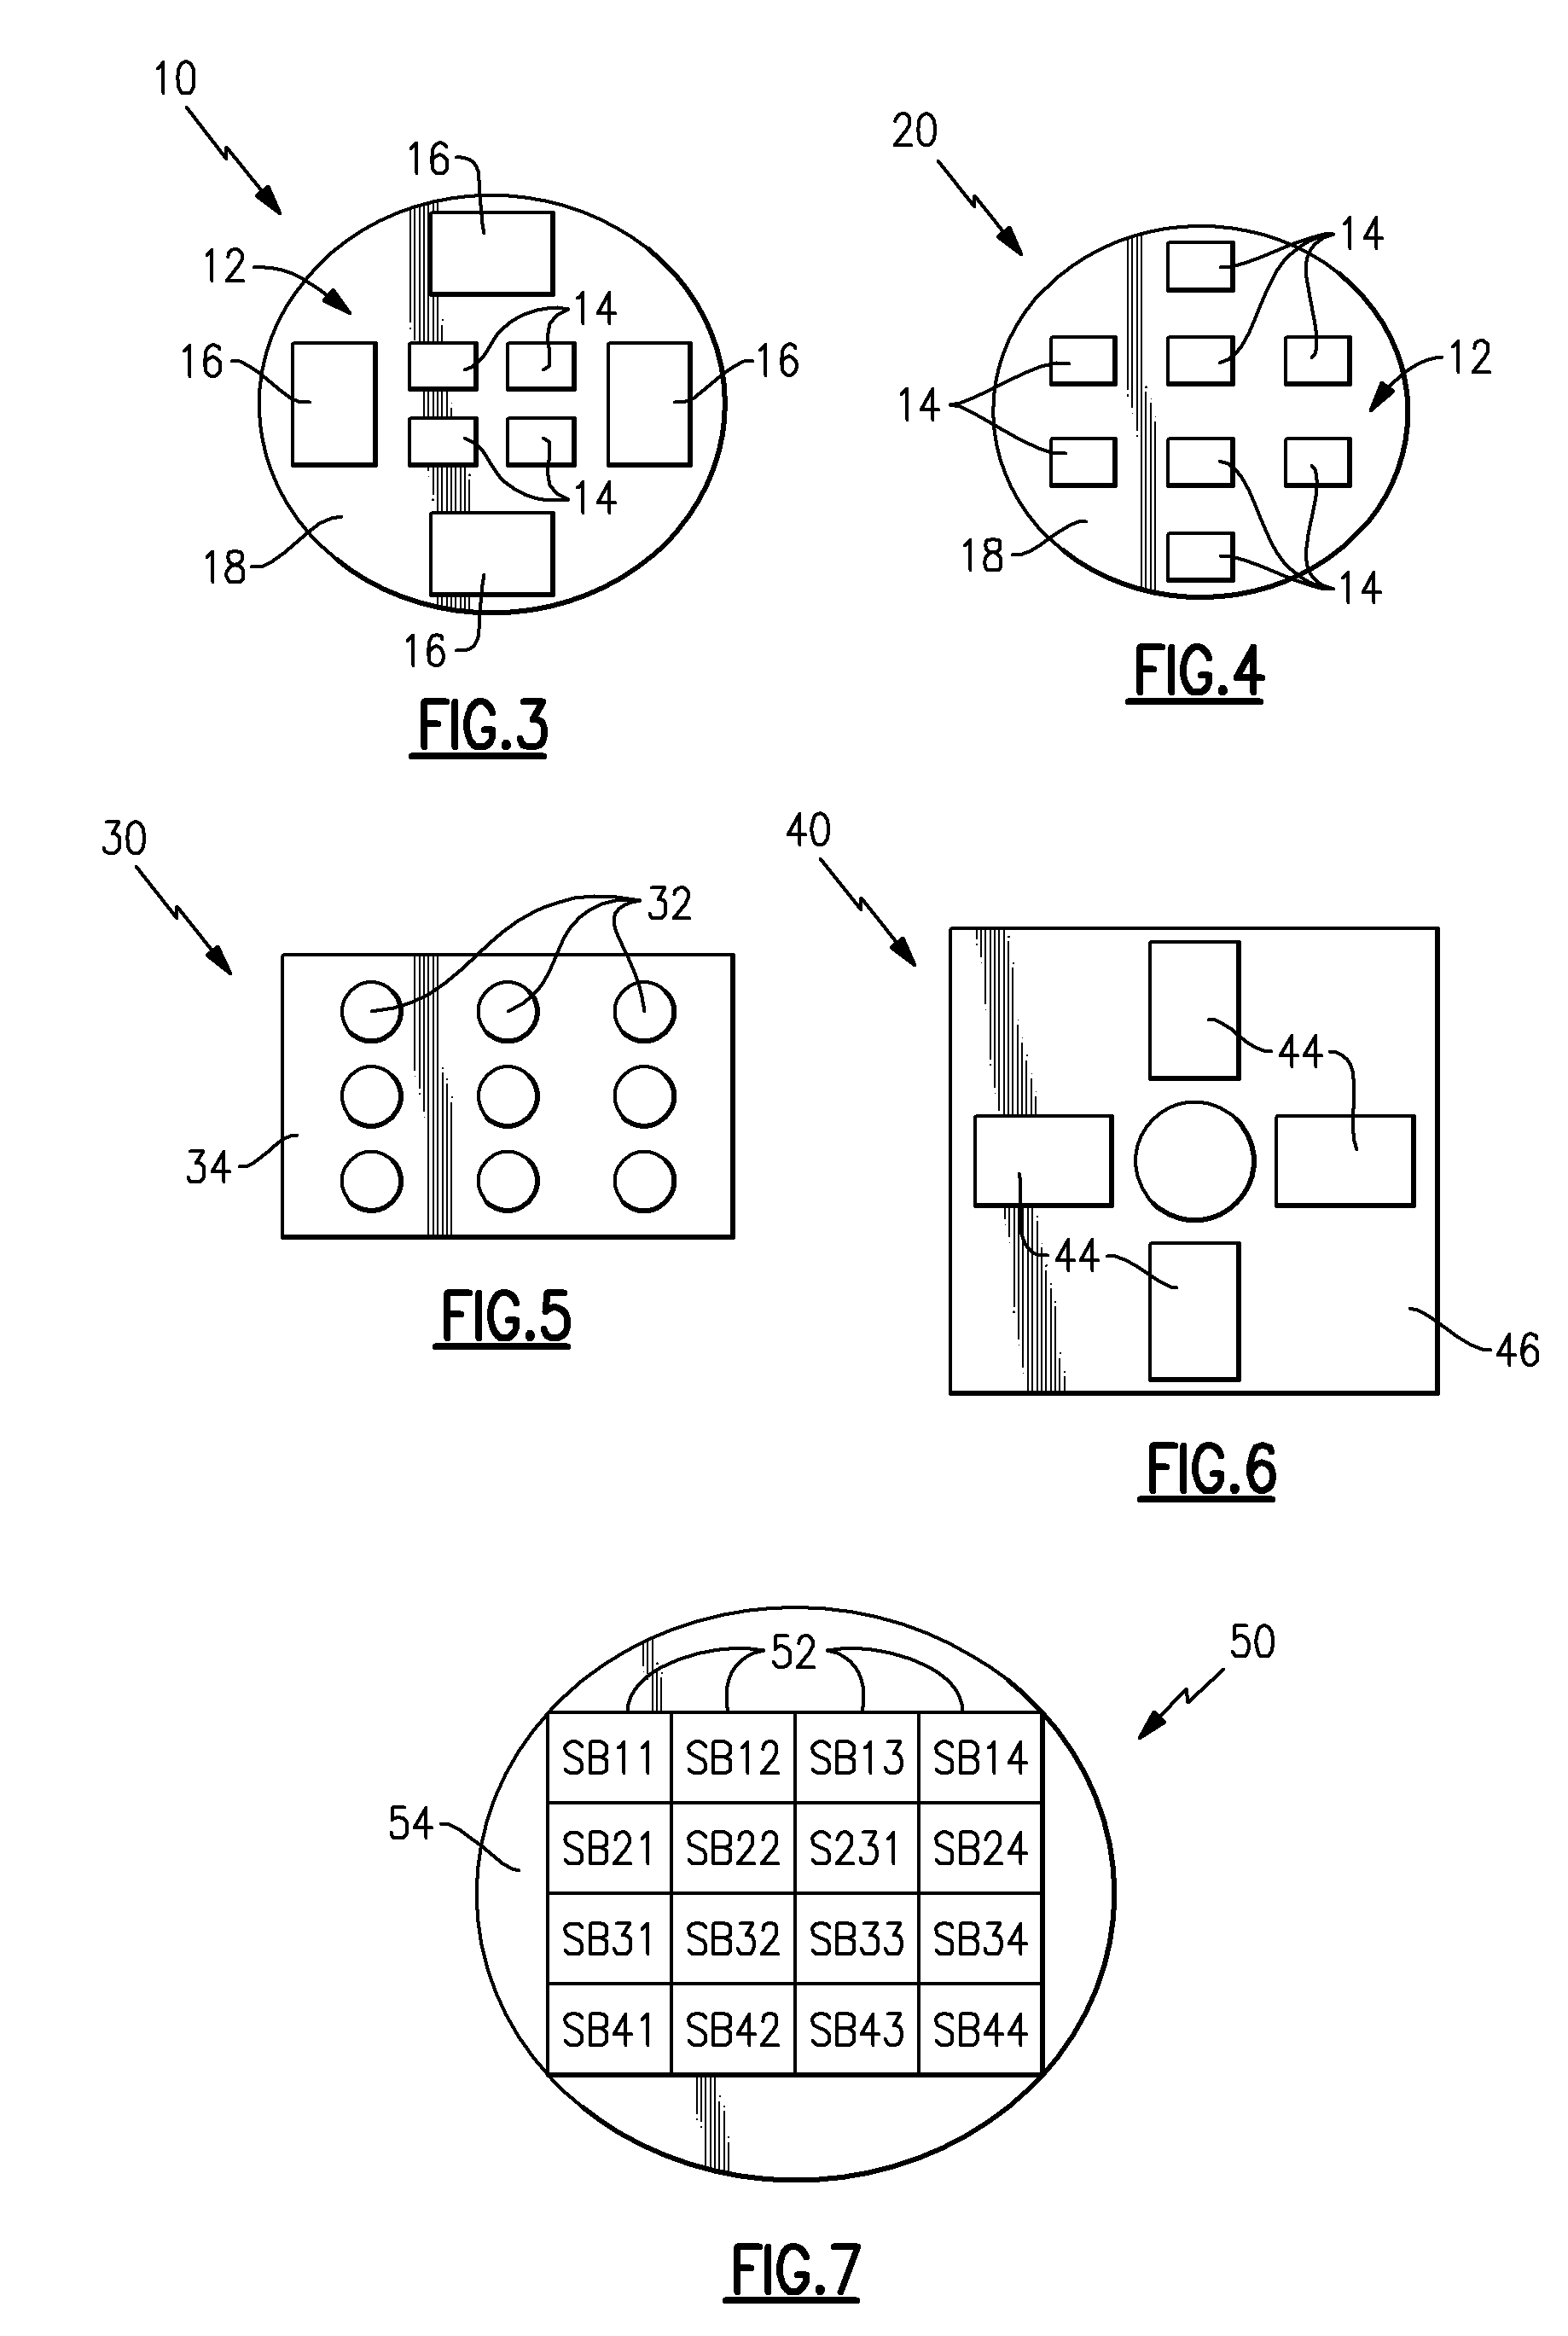 Addressable matrices/cluster blanks for dental cad/cam systems and optimization thereof